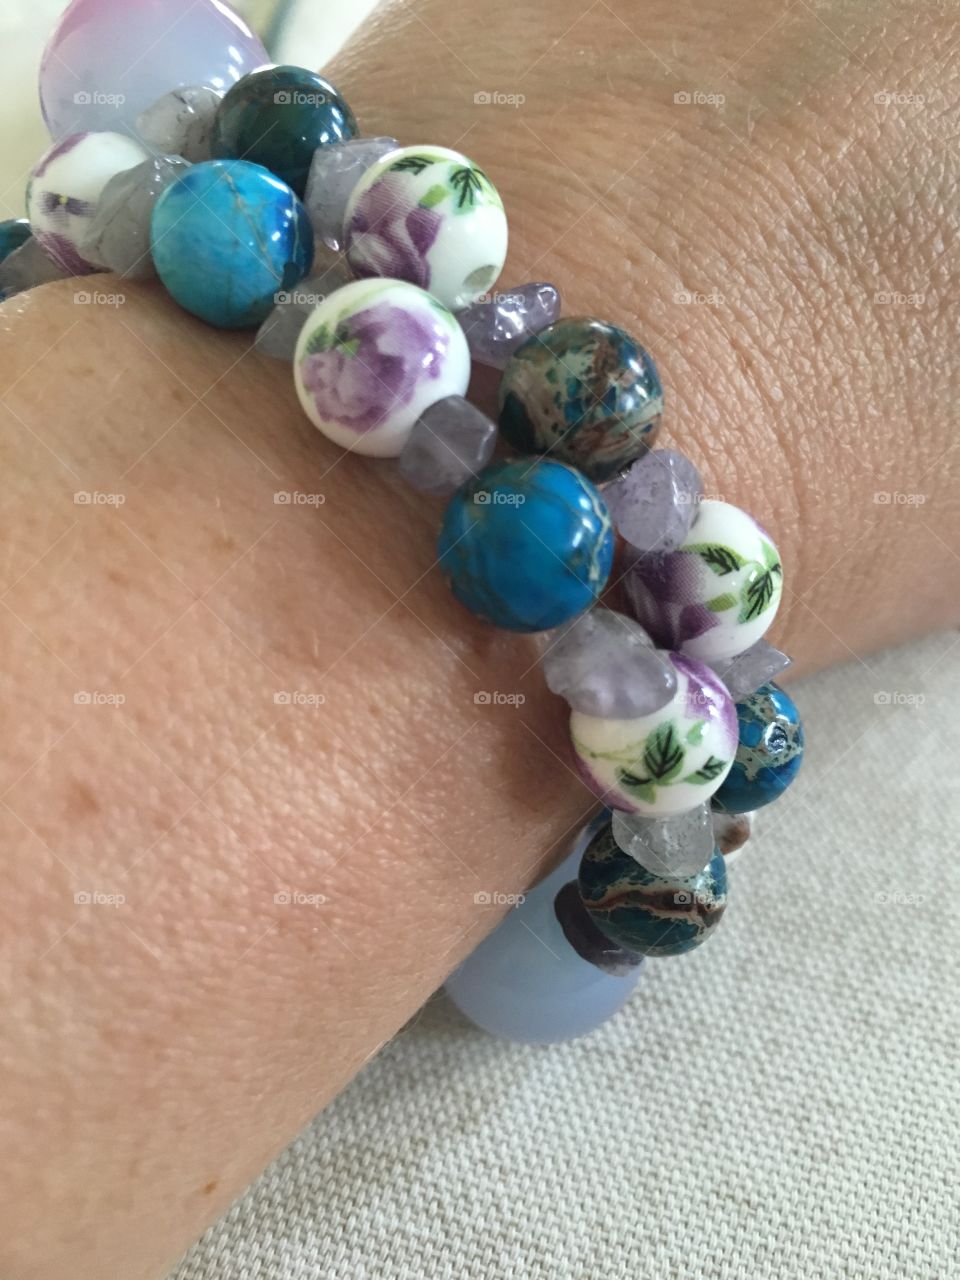 This beautiful beaded bracelet was a gift handmade with love. The colors are beautiful together but what stands out to me is the purple roses on some of the beads.